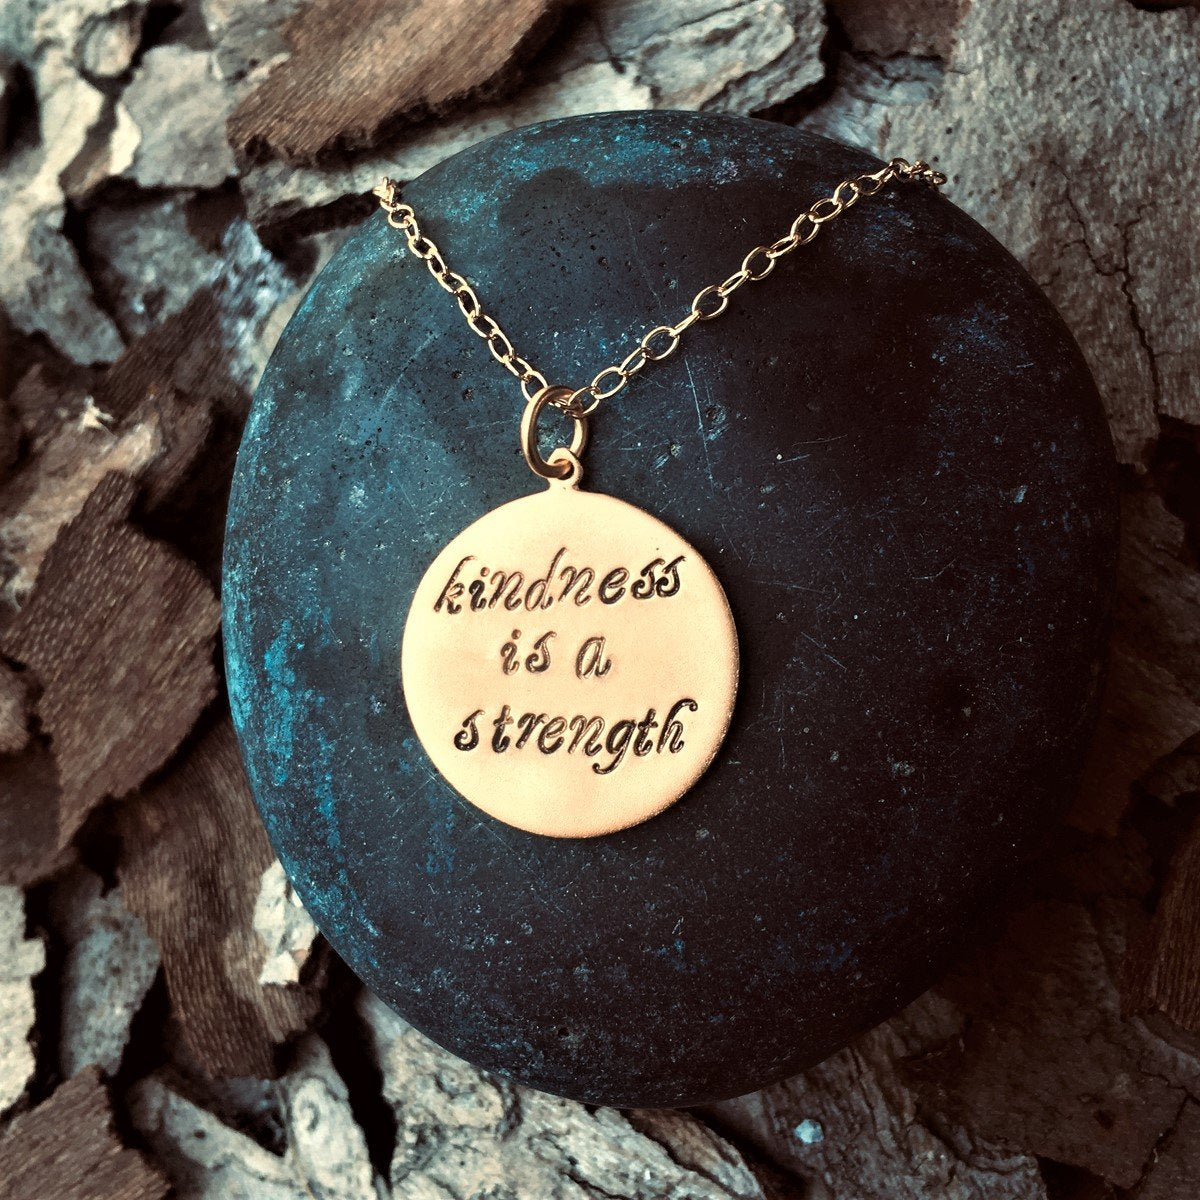 Kindness is a Strength Gold Necklace, Kindness Wins Jewelry